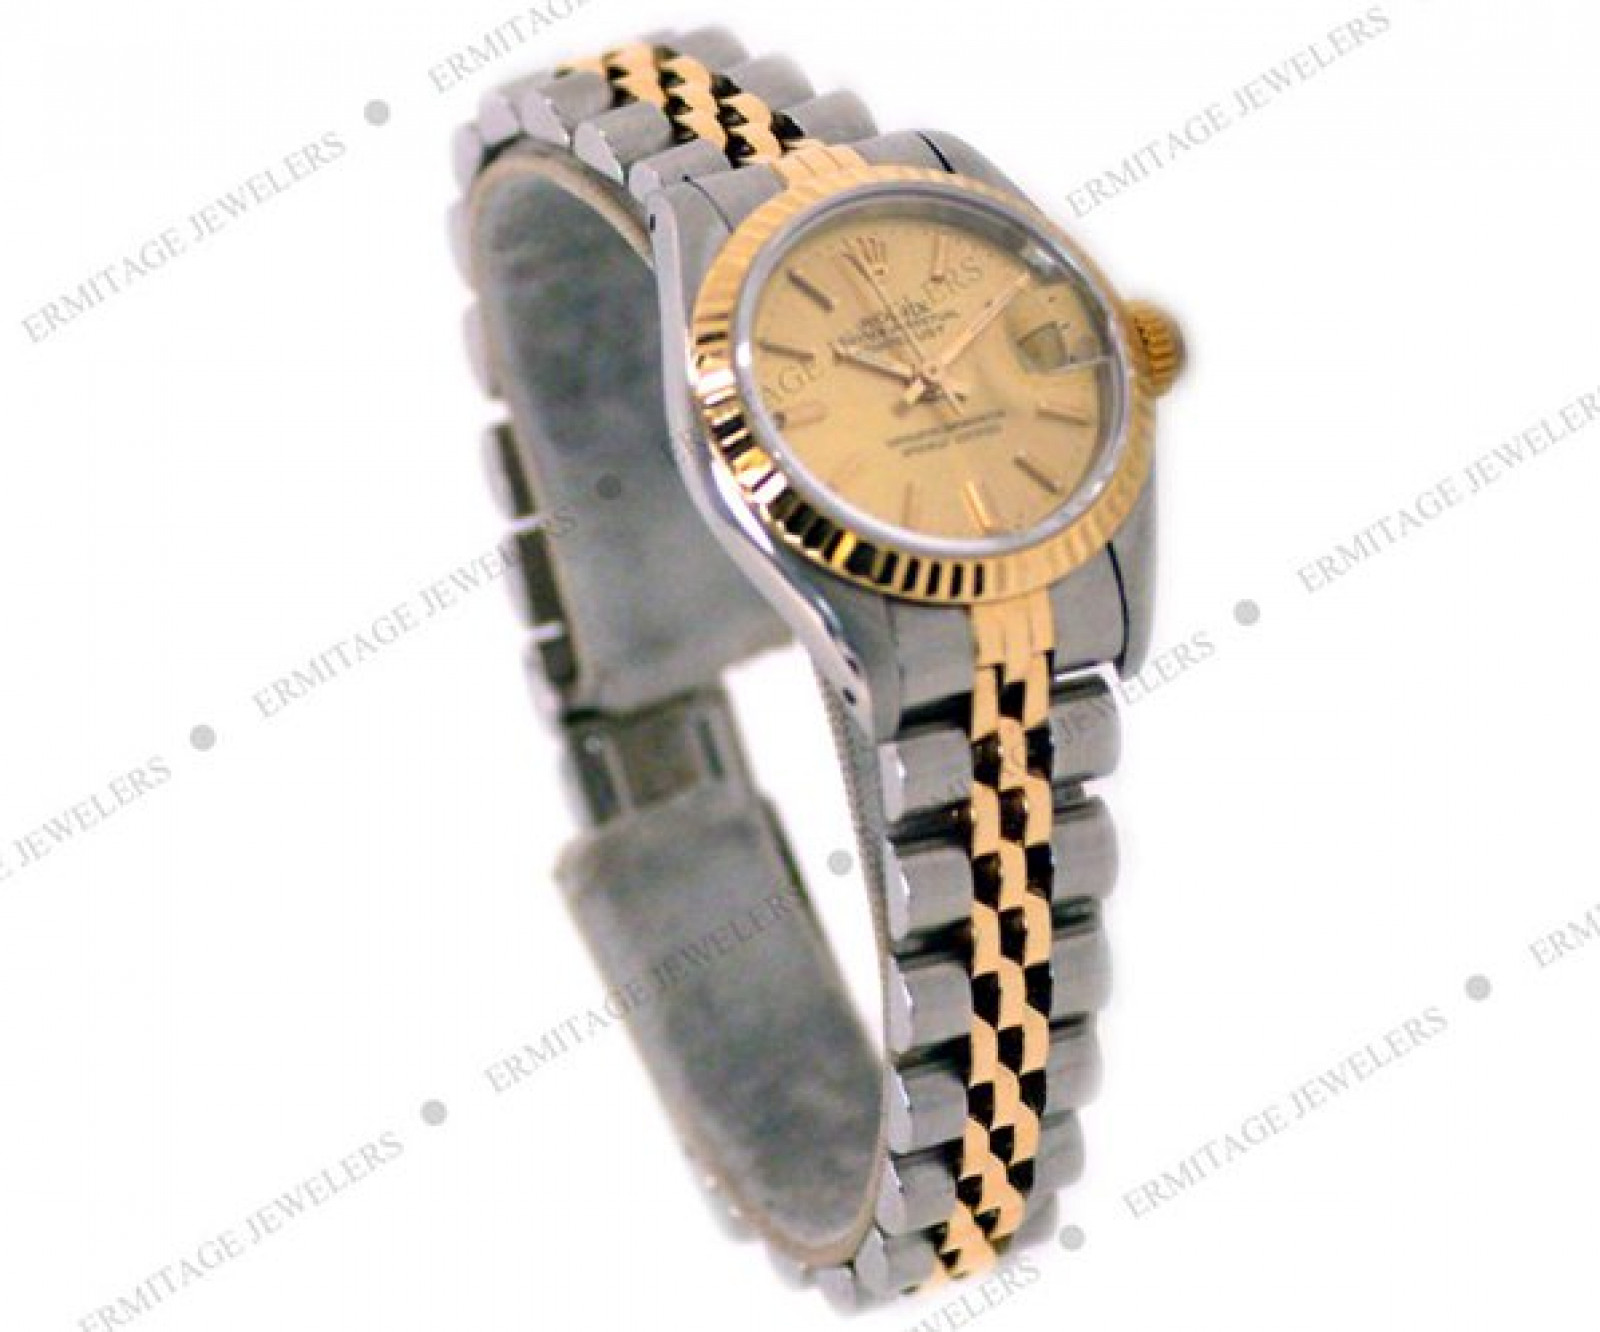 Pre-Owned Gold & Steel Rolex Datejust 69173 Year 1995